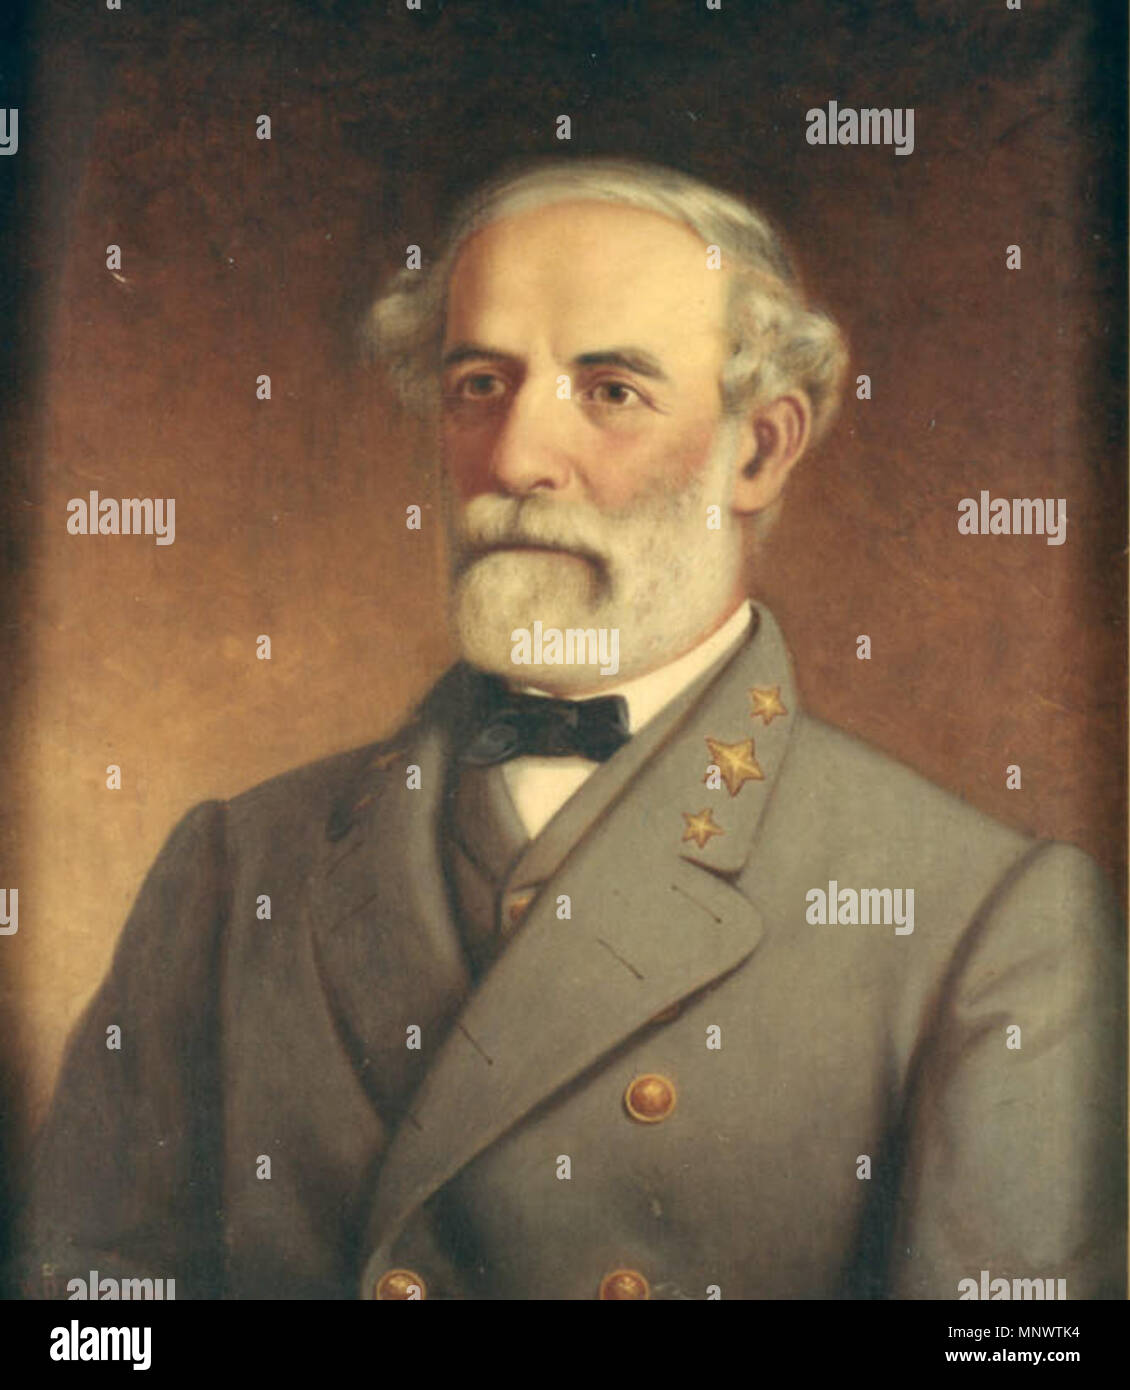 Oil portrait of Confederate General Robert E. Lee. The original portrait by  artist William D. Washington, based on an 1864 photograph. The portrait is  owned by the Virginia Military Institute .